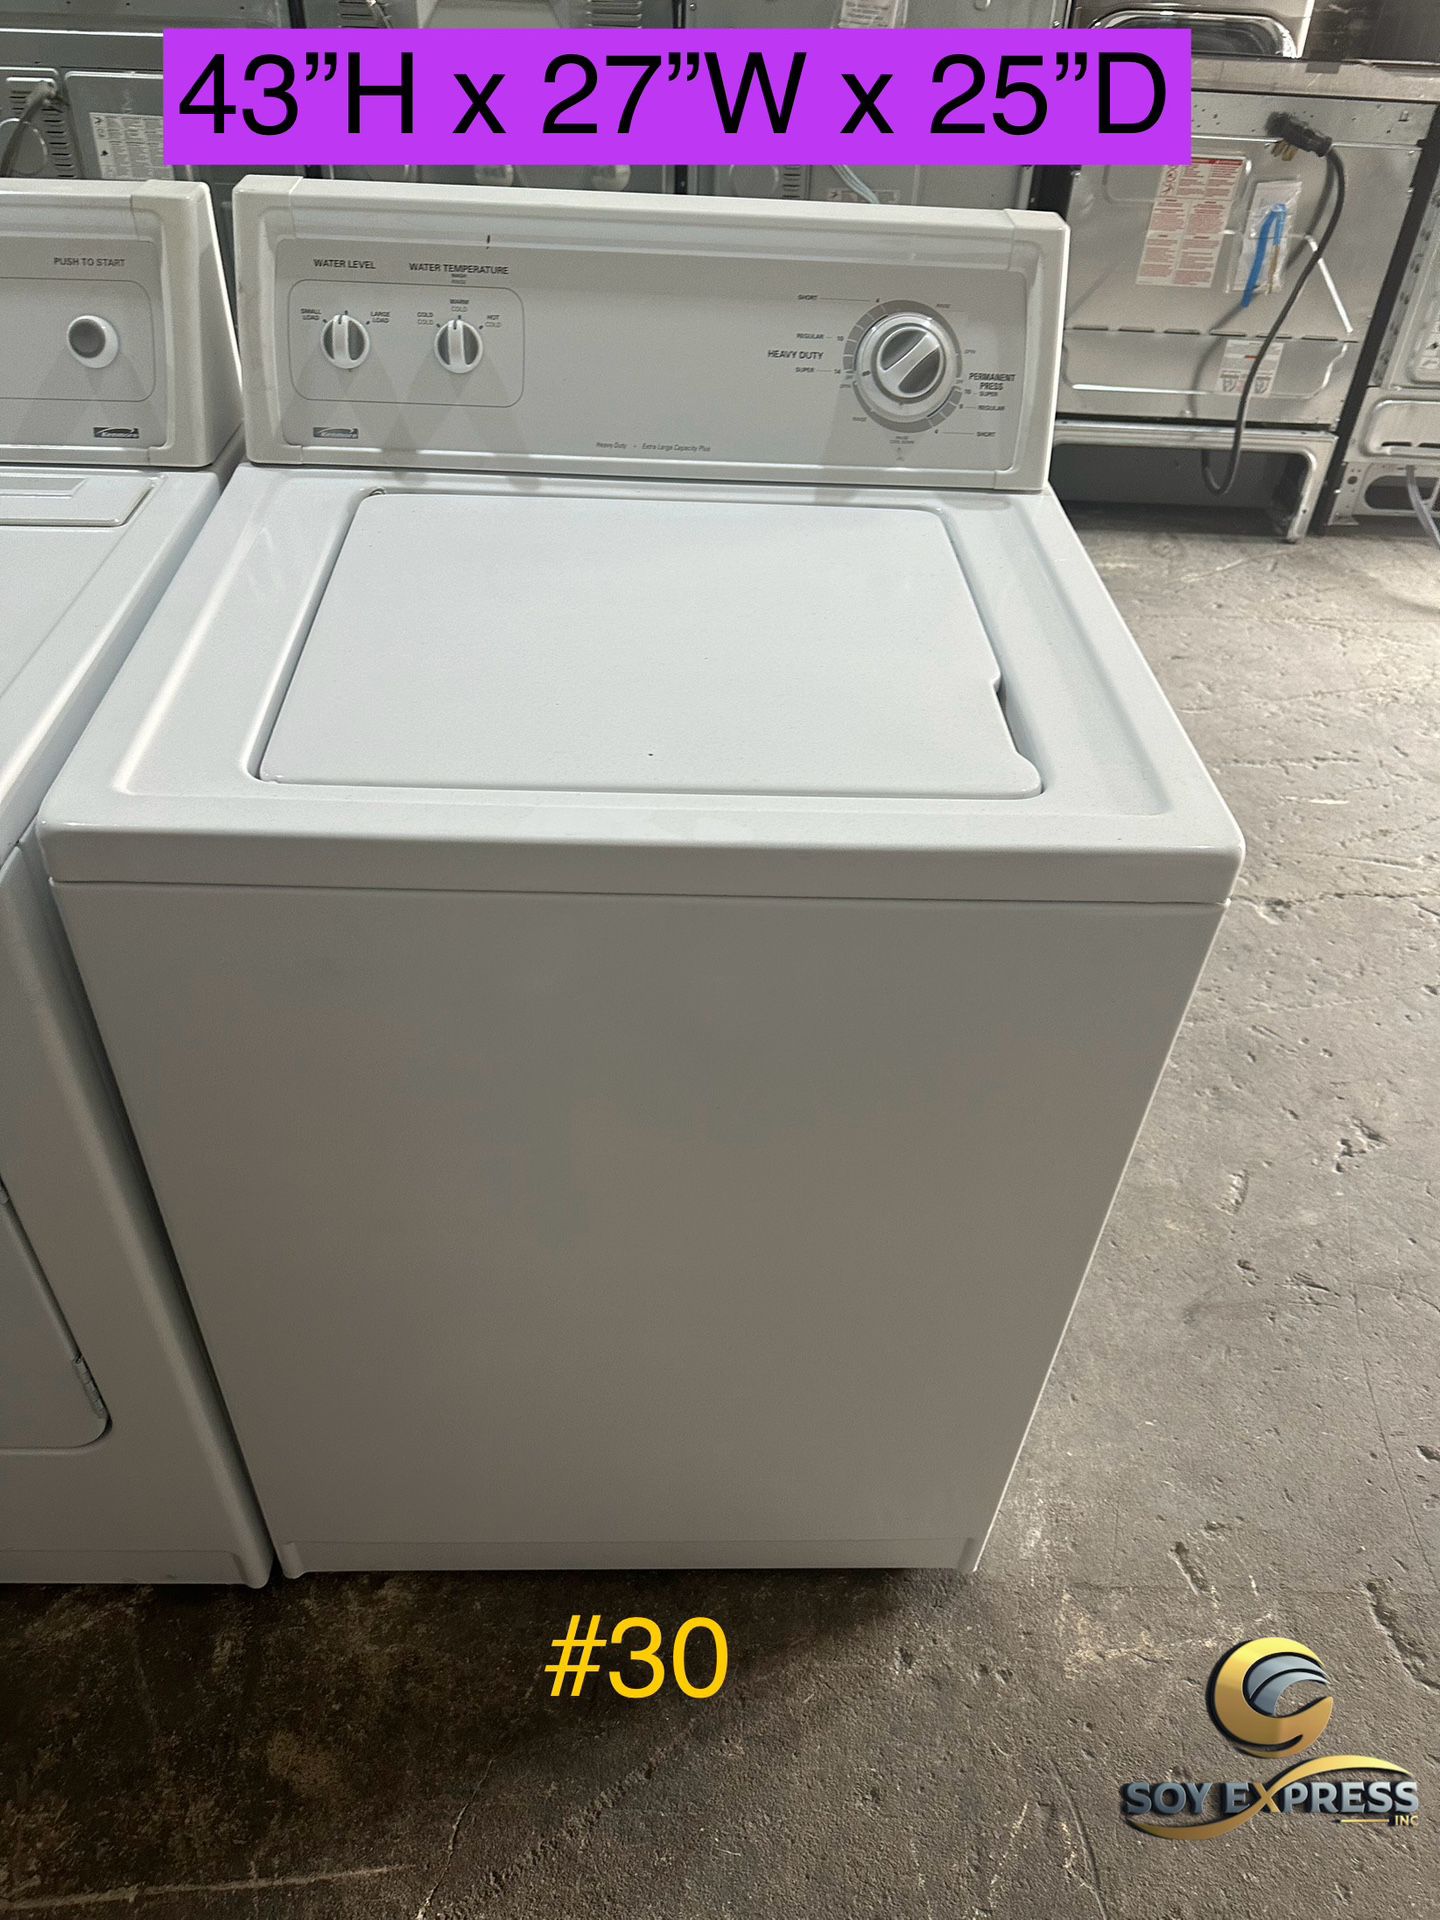 Kenmore Washer, KitchenAid Washer 🚨$200 For PICKUP 🚨$250 For DELIVERY🚨